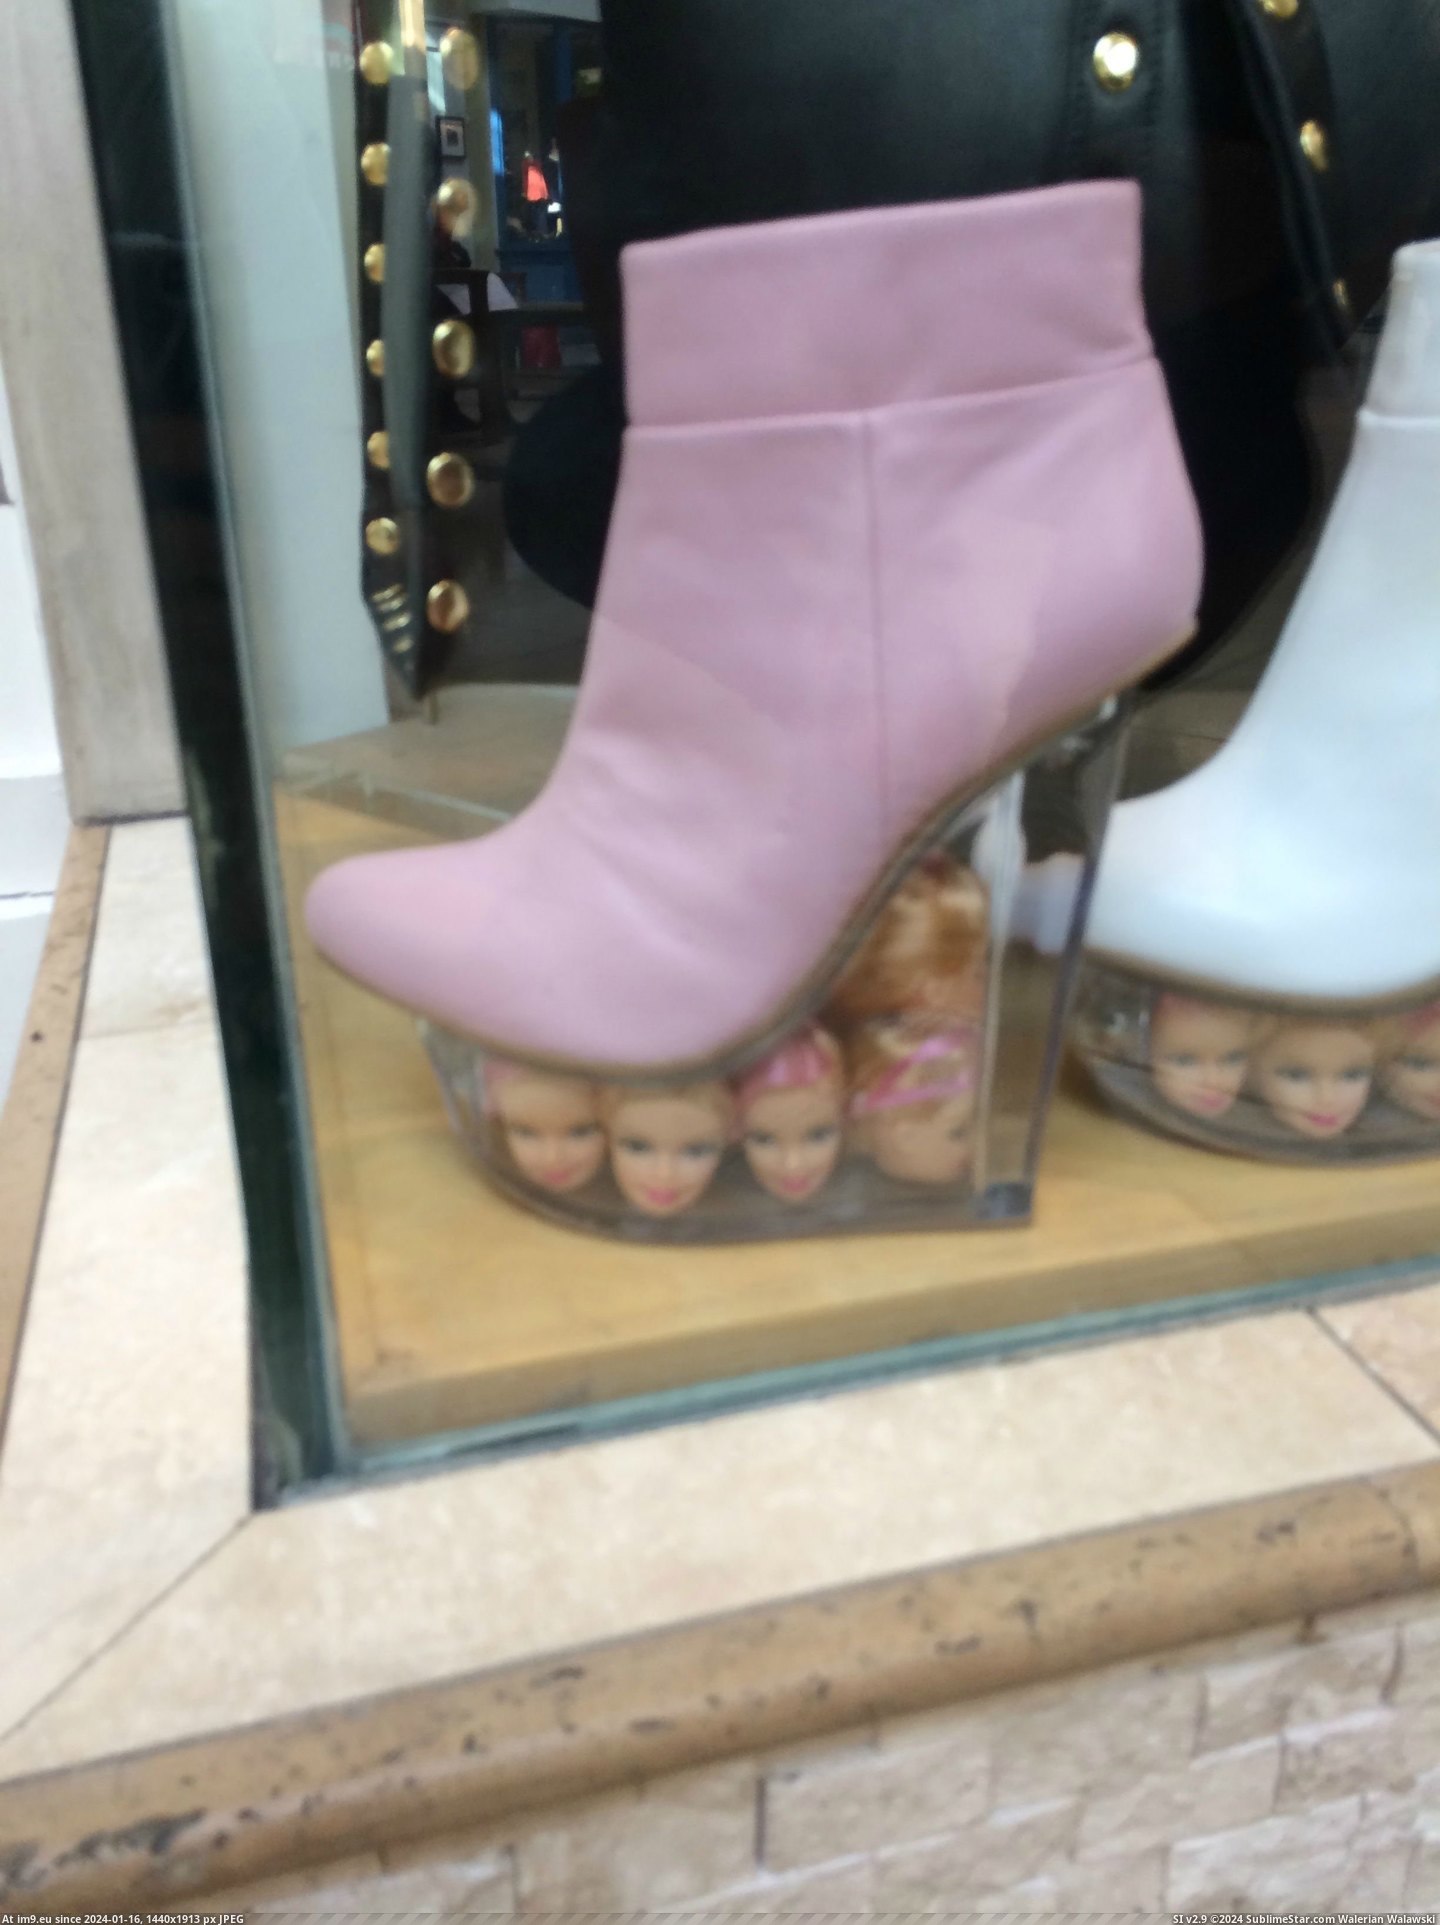 #Wtf #Local #Clever #Heads #Barbie #Mall #Shoe [Wtf] Couldn't even think of a clever title so here is a shoe with barbie heads in it seen at my local mall. Pic. (Bild von album My r/WTF favs))